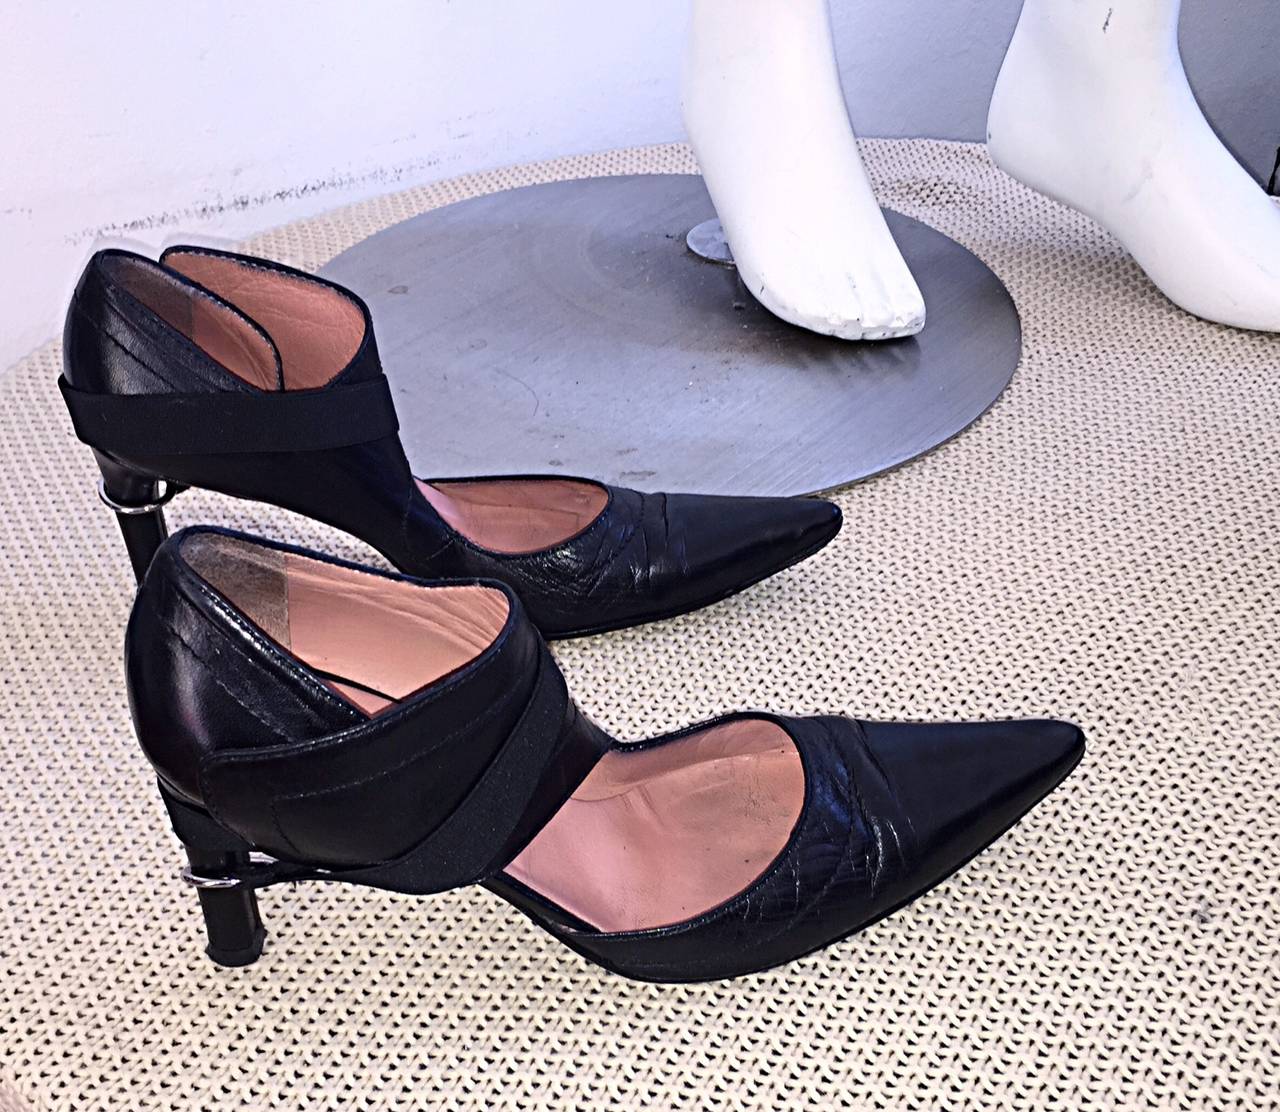 Rare Dirk Bikkembergs runway heels! Features a 'bondage' strap, with a loop that attaches to the heel. Sleek design, that can be worn with jeans, a dress, skirt, or suit! Made in Italy. In great condition. Minor wear from age. Marked Size 38 (US